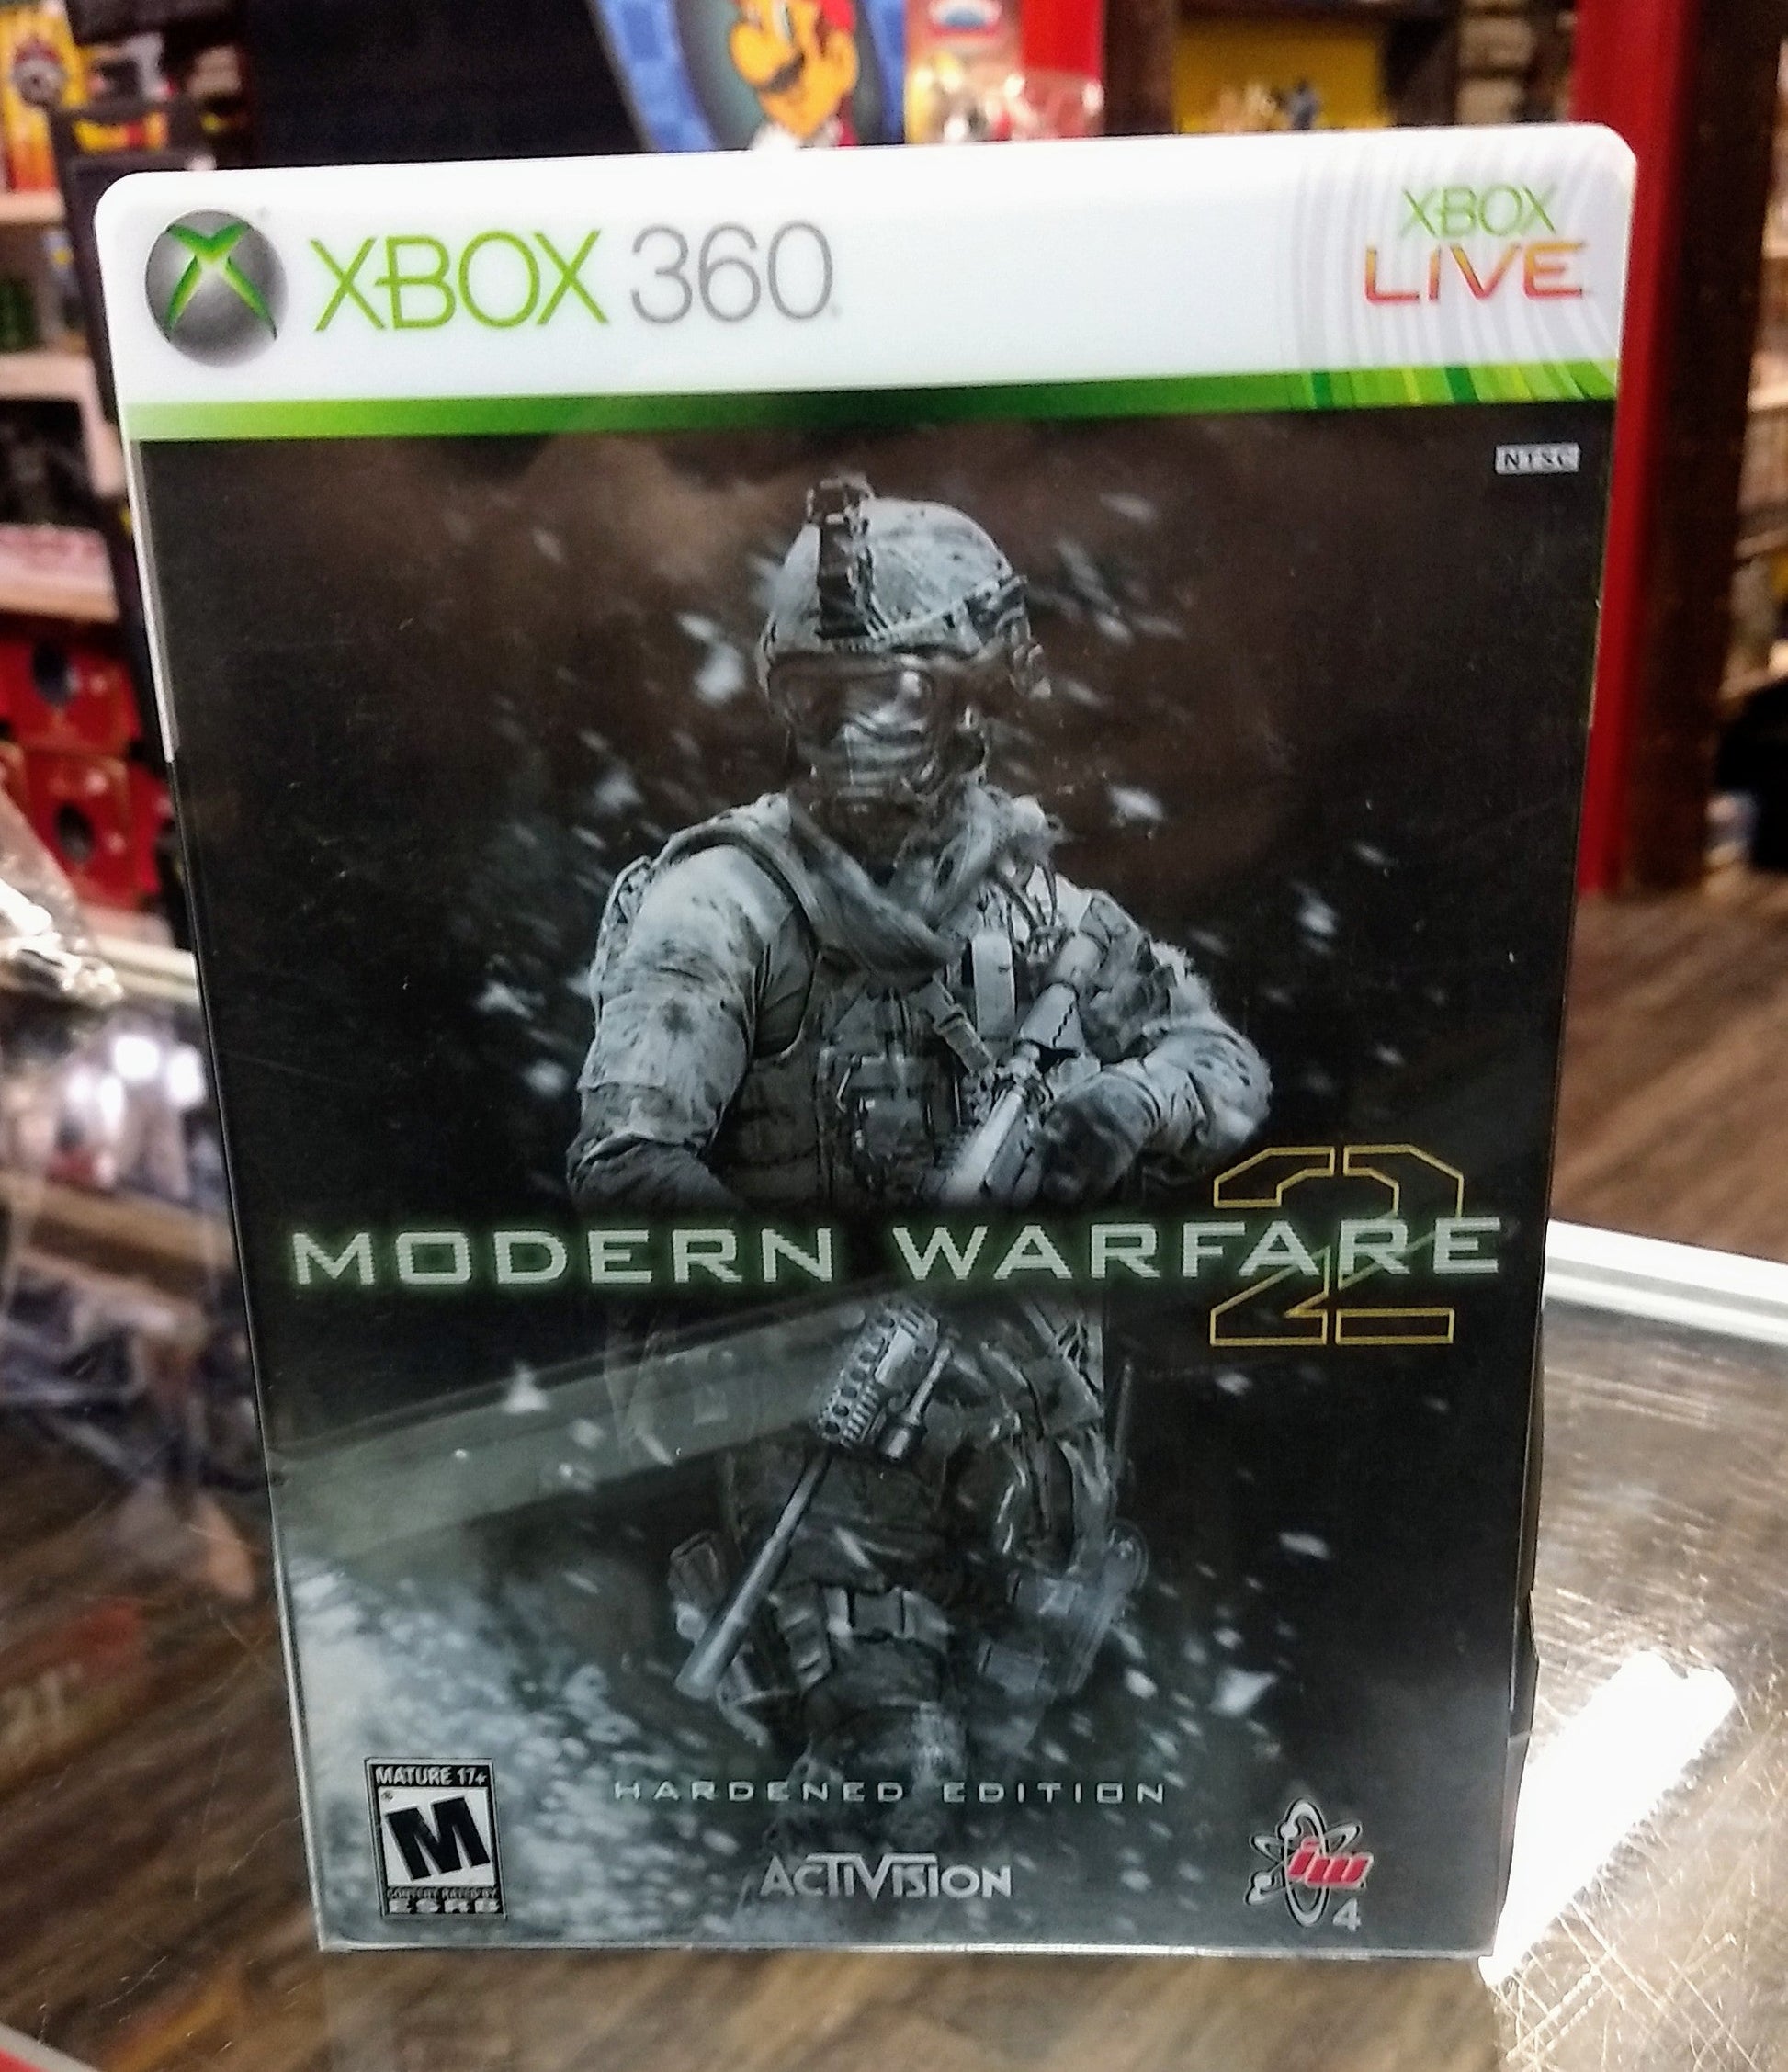 CALL OF DUTY MODERN WARFARE 2 HARDENED EDITION XBOX 360 X360 - jeux video game-x